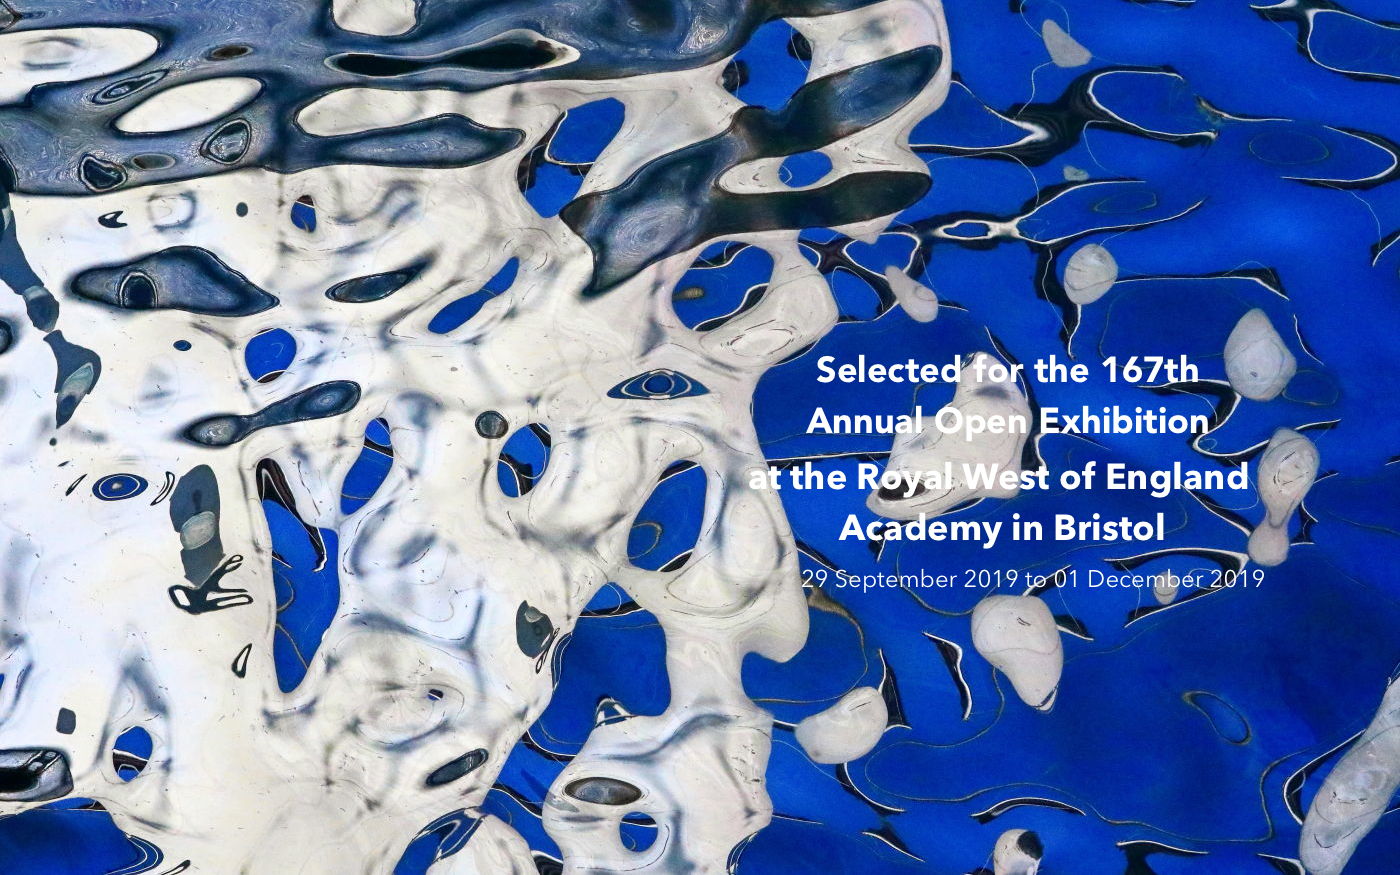 Selected for the 167th Annual Open Exhibition at the Royal West of England Academy